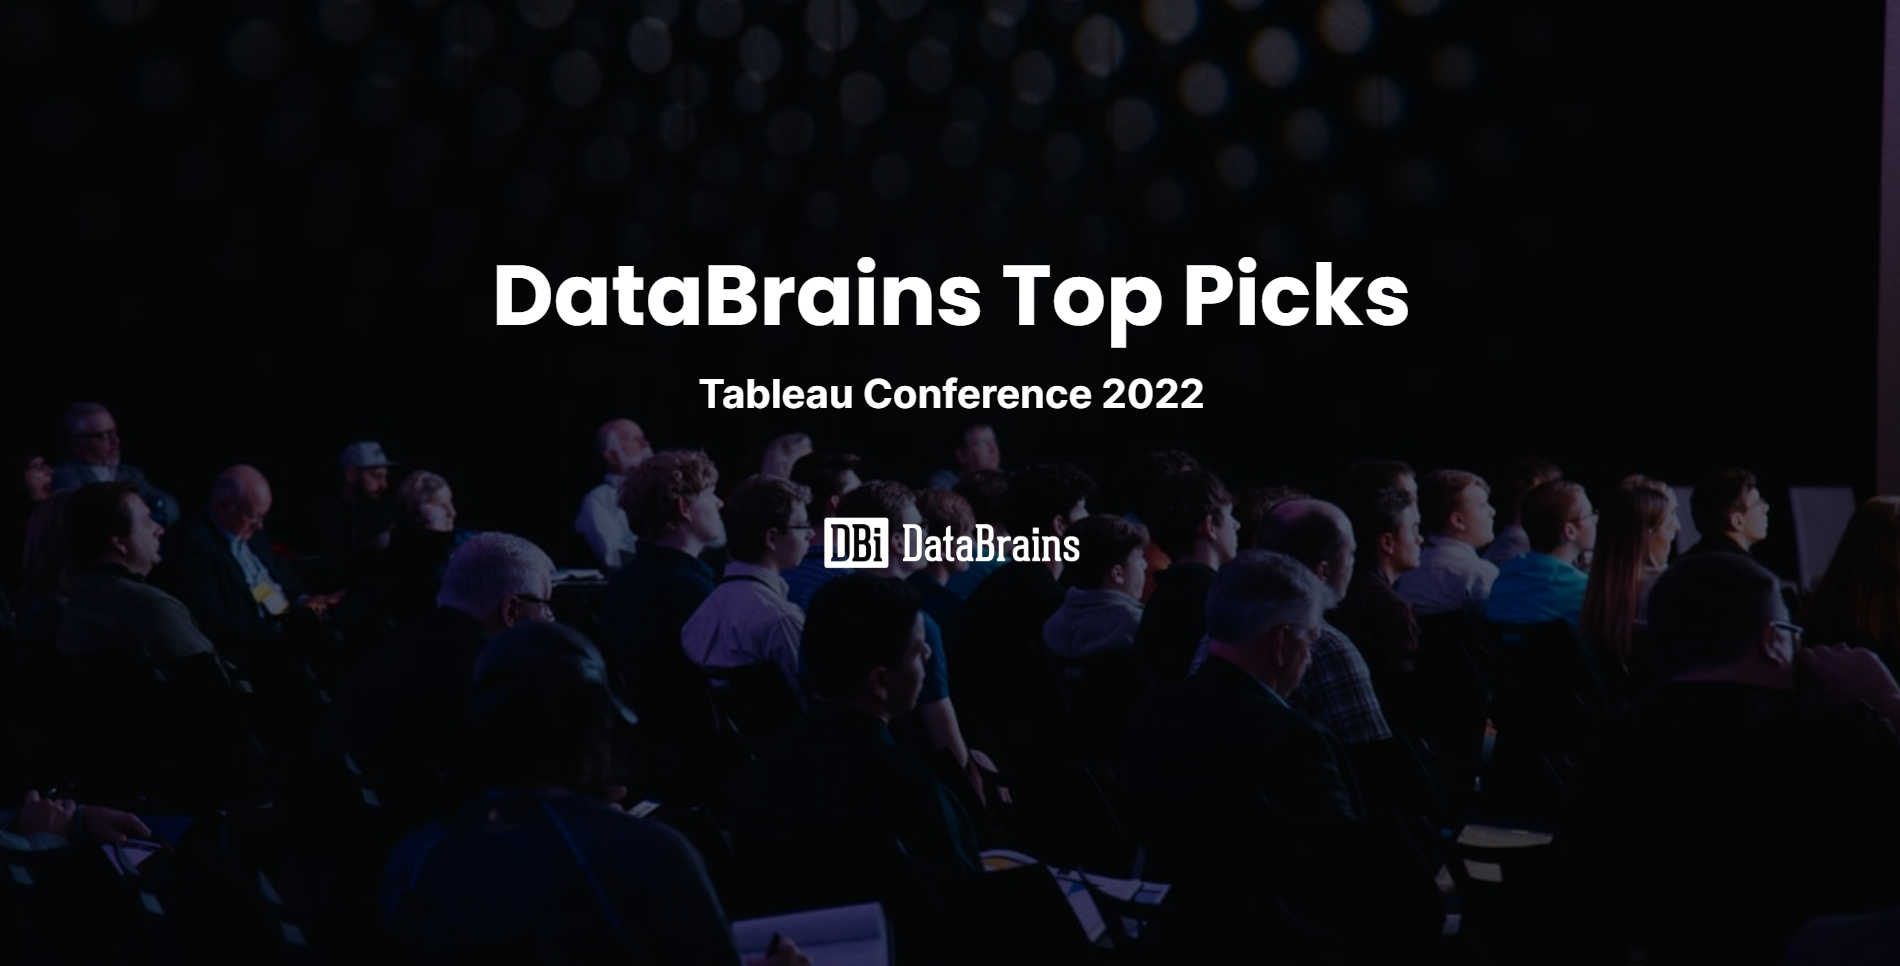 A conference with the words "DataBrains Top Picks, Tableau Conference 2022" with the DataBrains logo below it